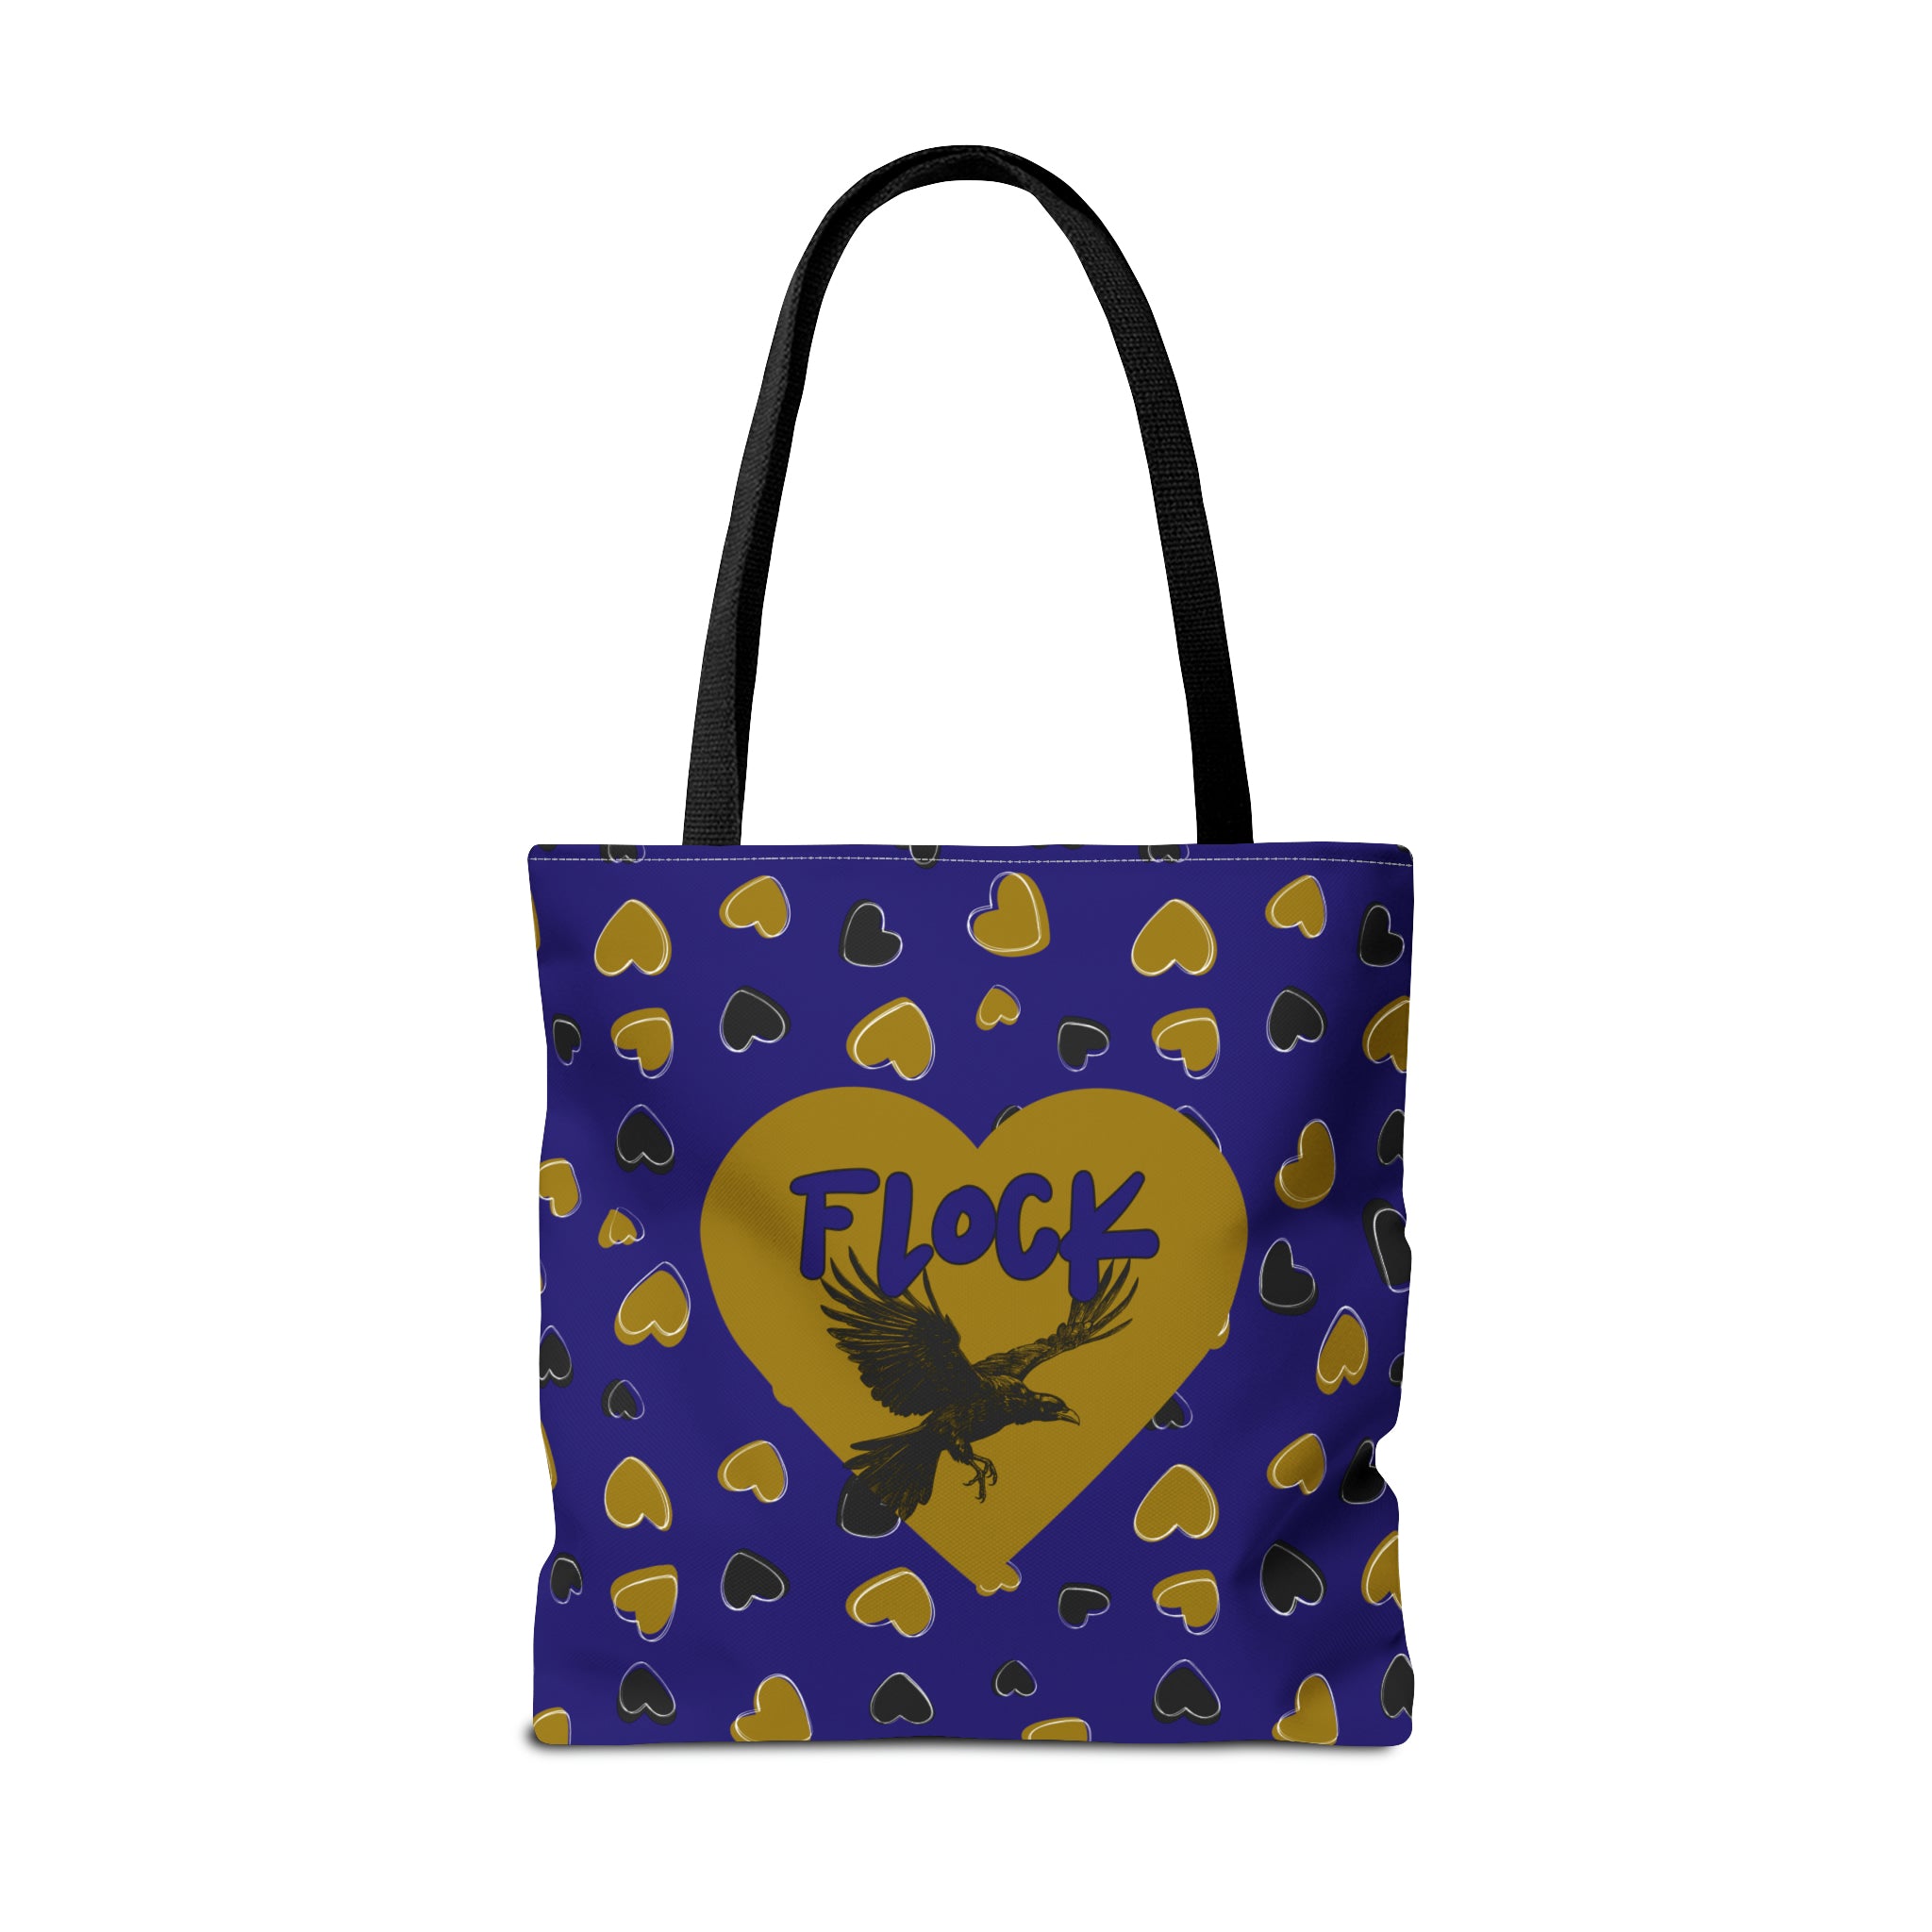 Flock Tote Heart Theme | Shopping Tote for Baltimore Sports Fans | Baltimore Valentine Gift